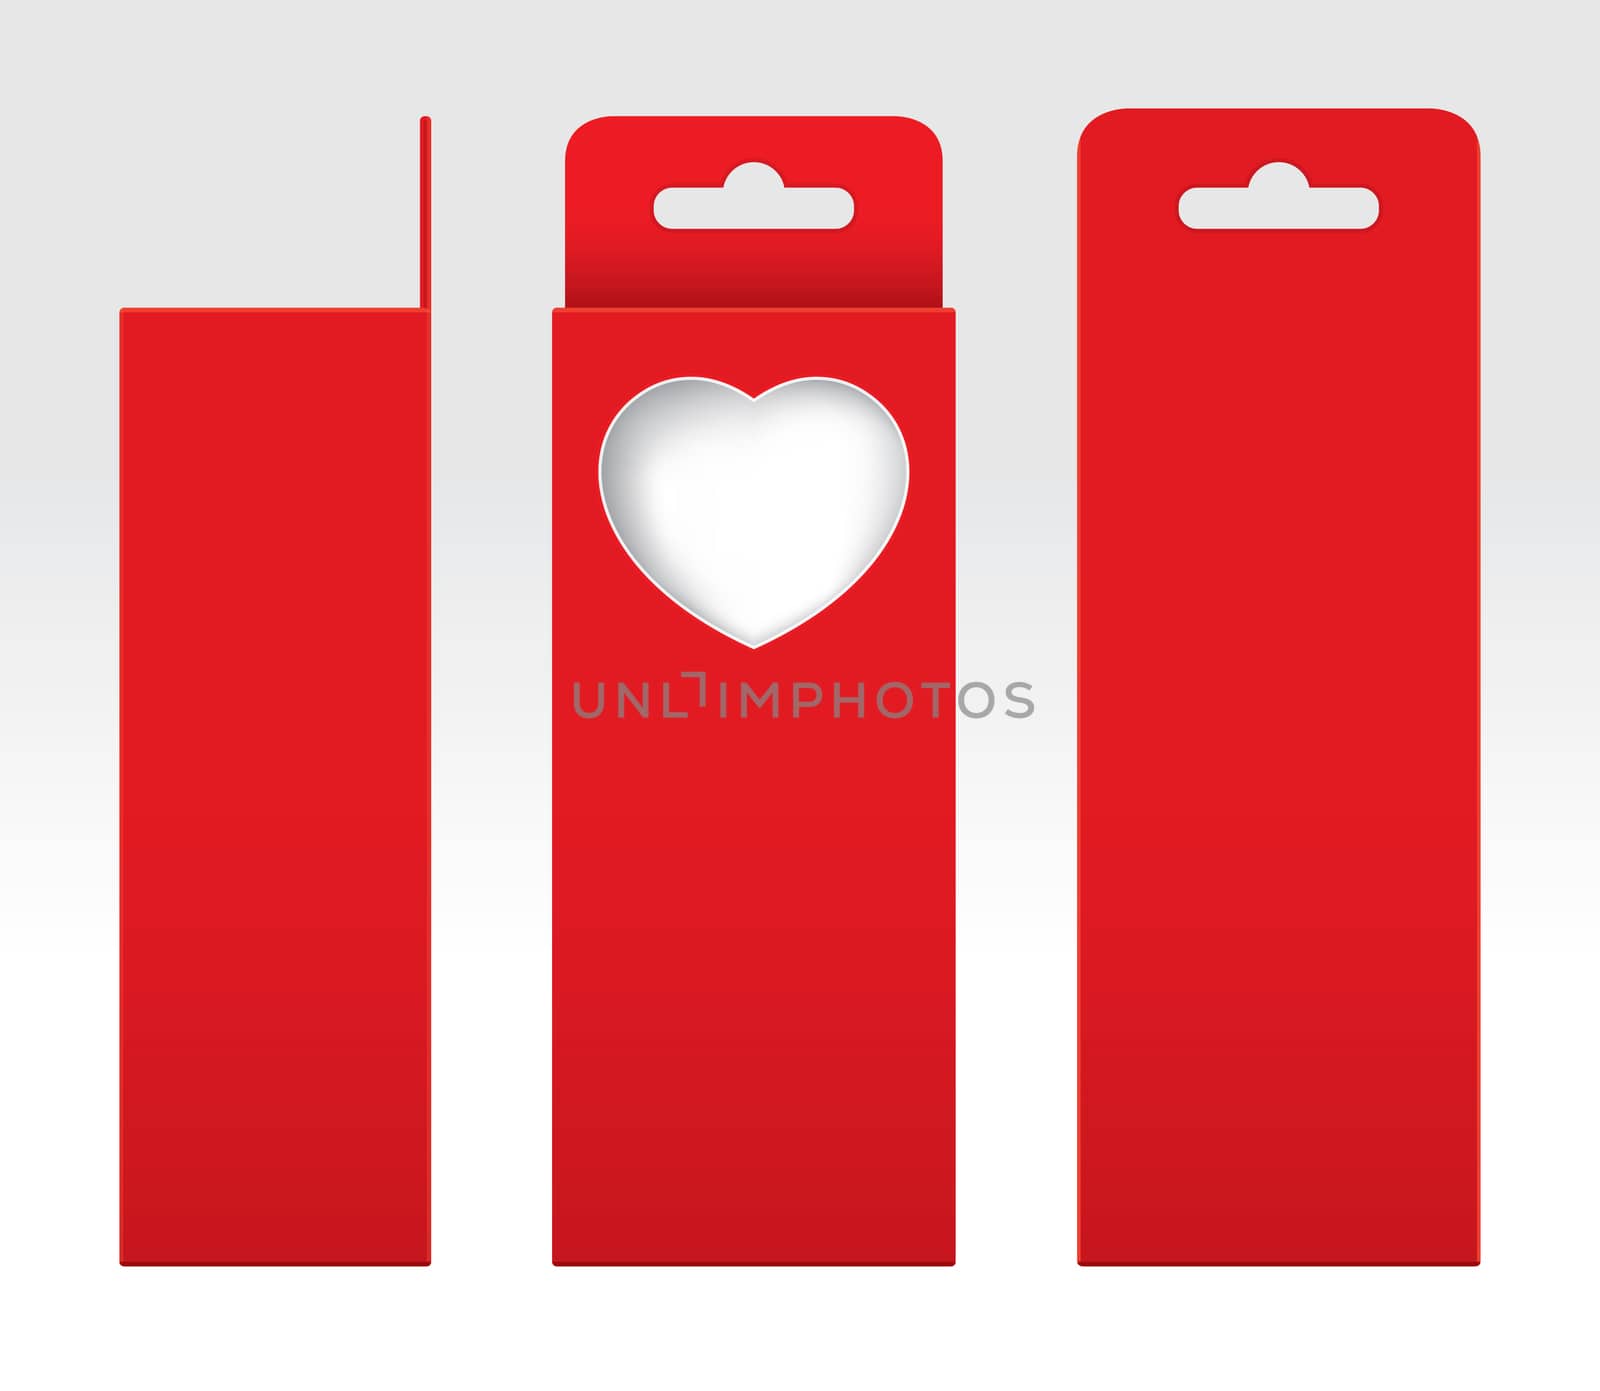 Hanging Red Box window heart-shaped cut out Packaging Template blank, Empty Box red Cardboard, Gift Boxes red kraft Package Carton